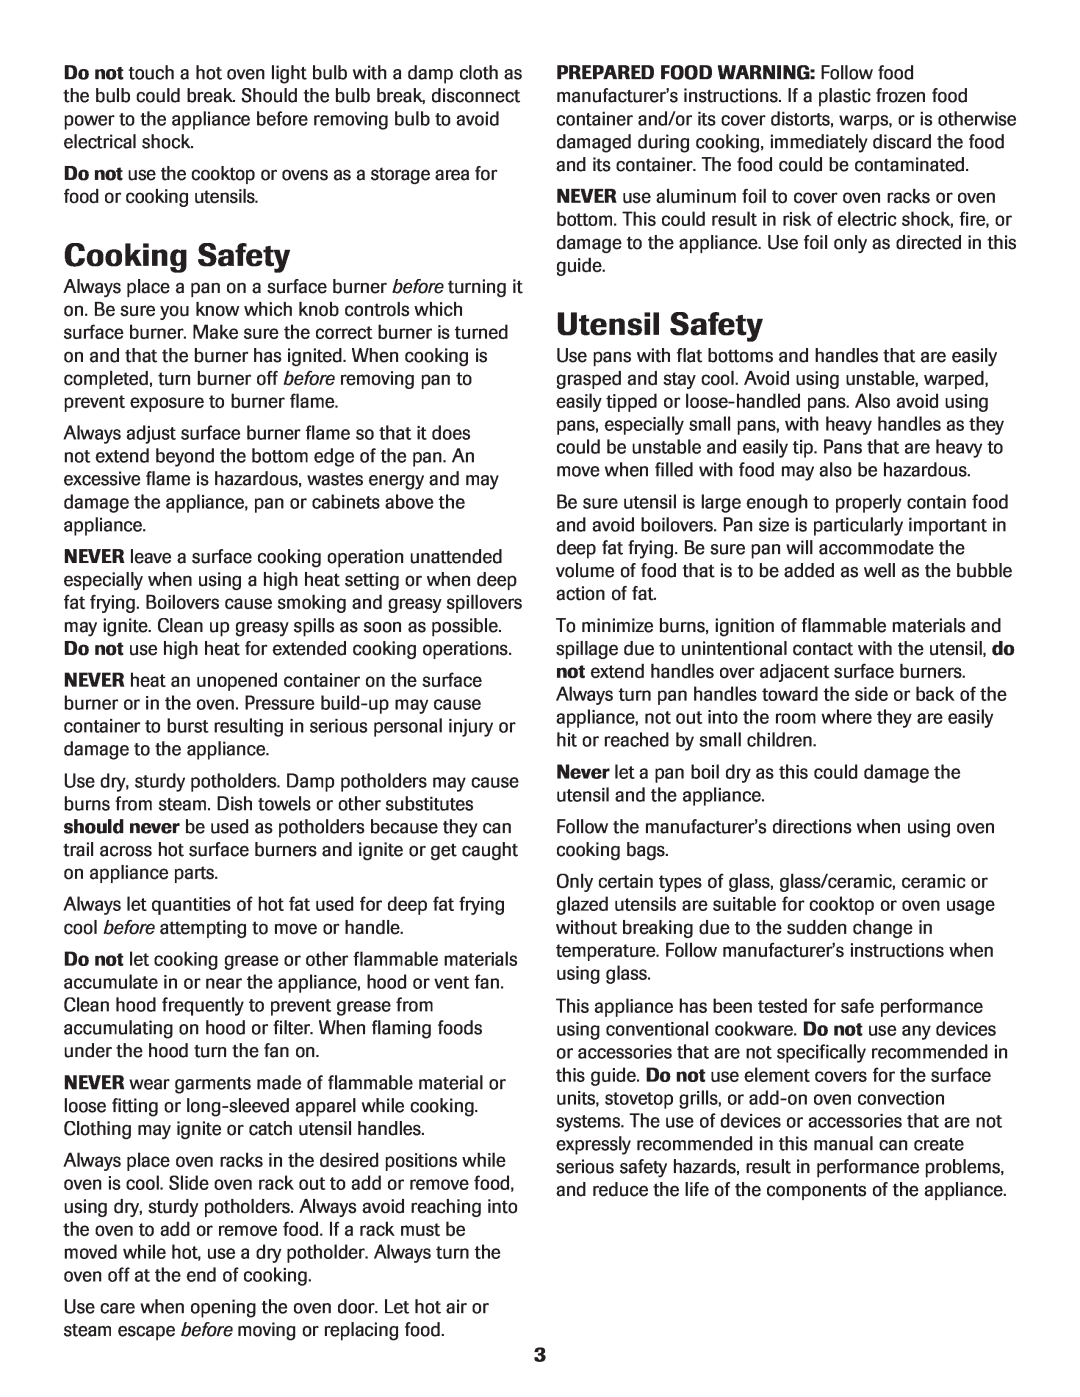 Magic Chef MGR5765QDW important safety instructions Cooking Safety, Utensil Safety 